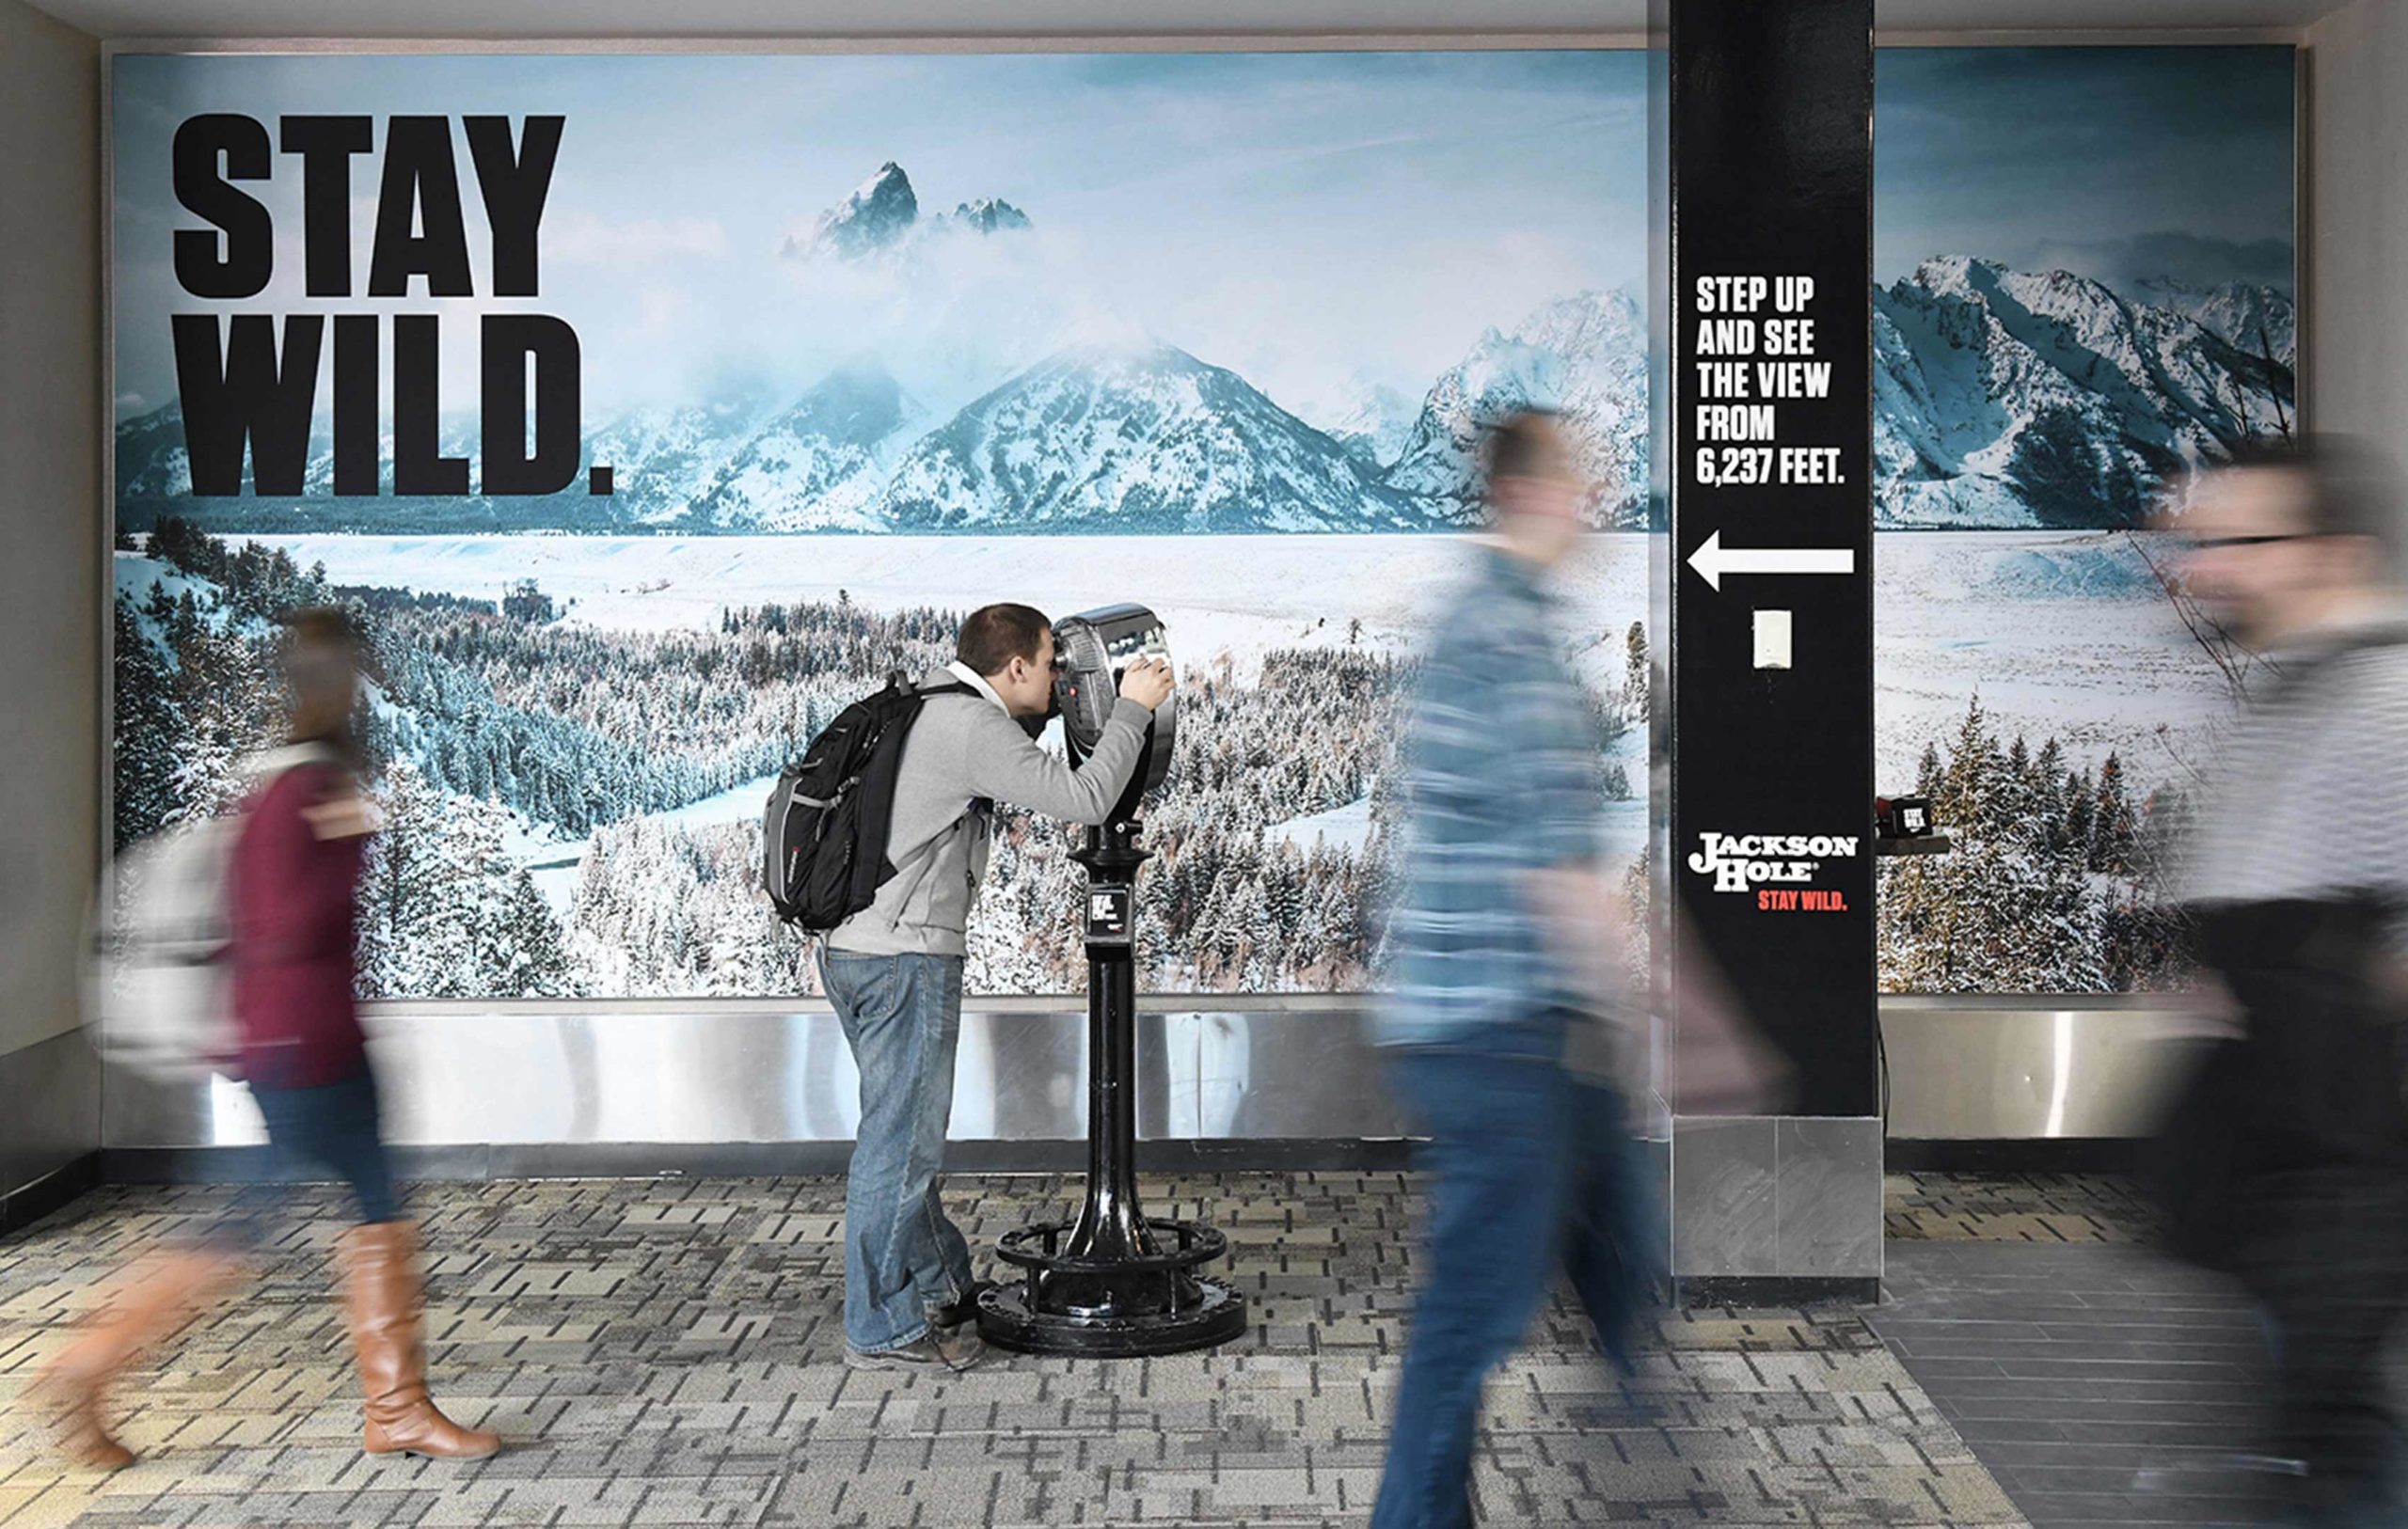 New-Thought-Visit-Jackson-Hole-Stay-Wild-Campaign-Man-Using-VRnocular-In-Airport-fullscreen